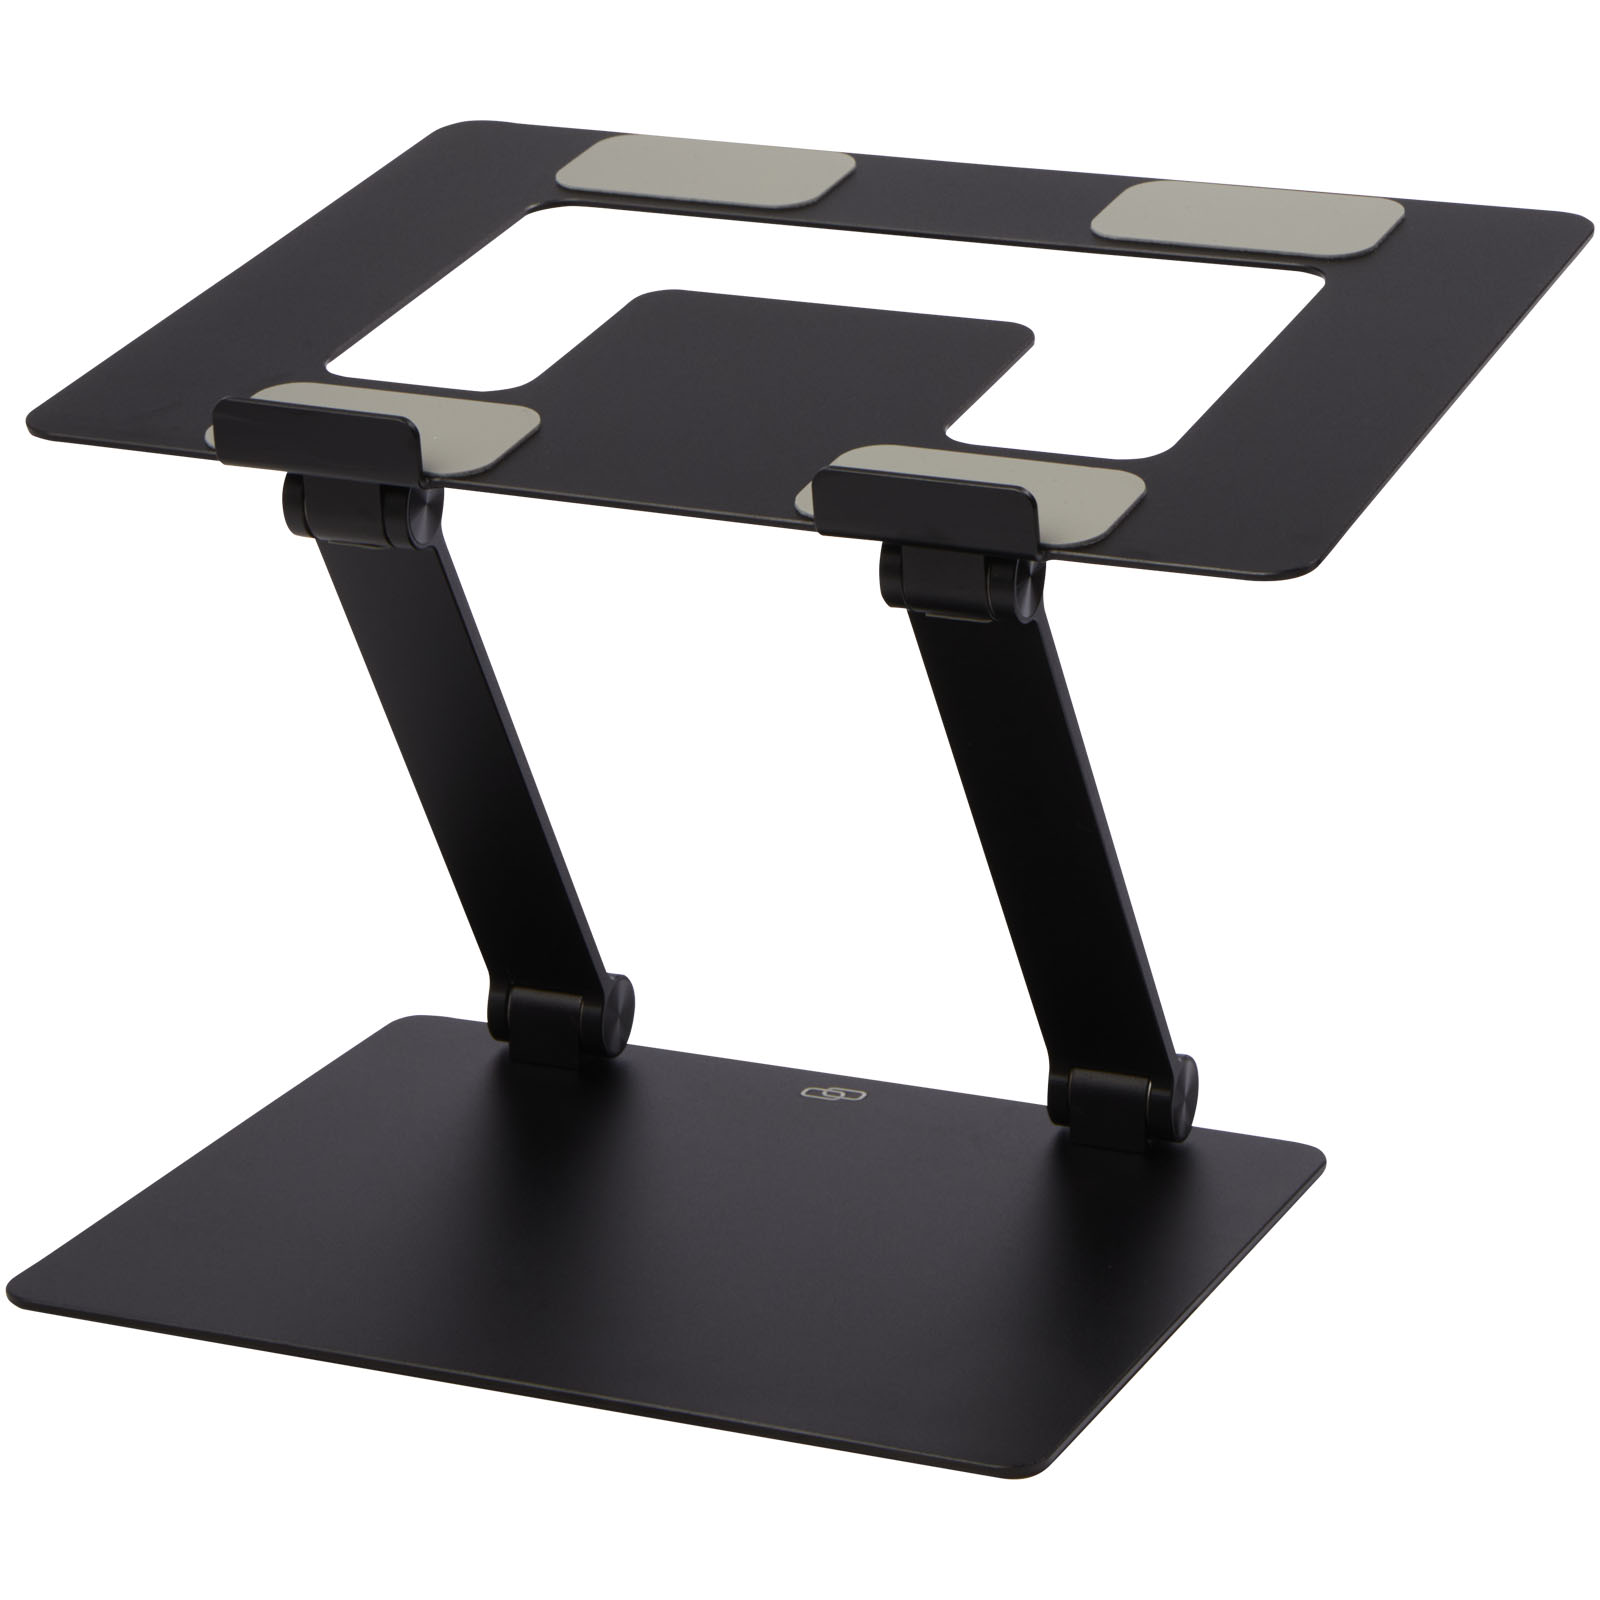 Advertising Computer Accessories - Rise Pro laptop stand - 4